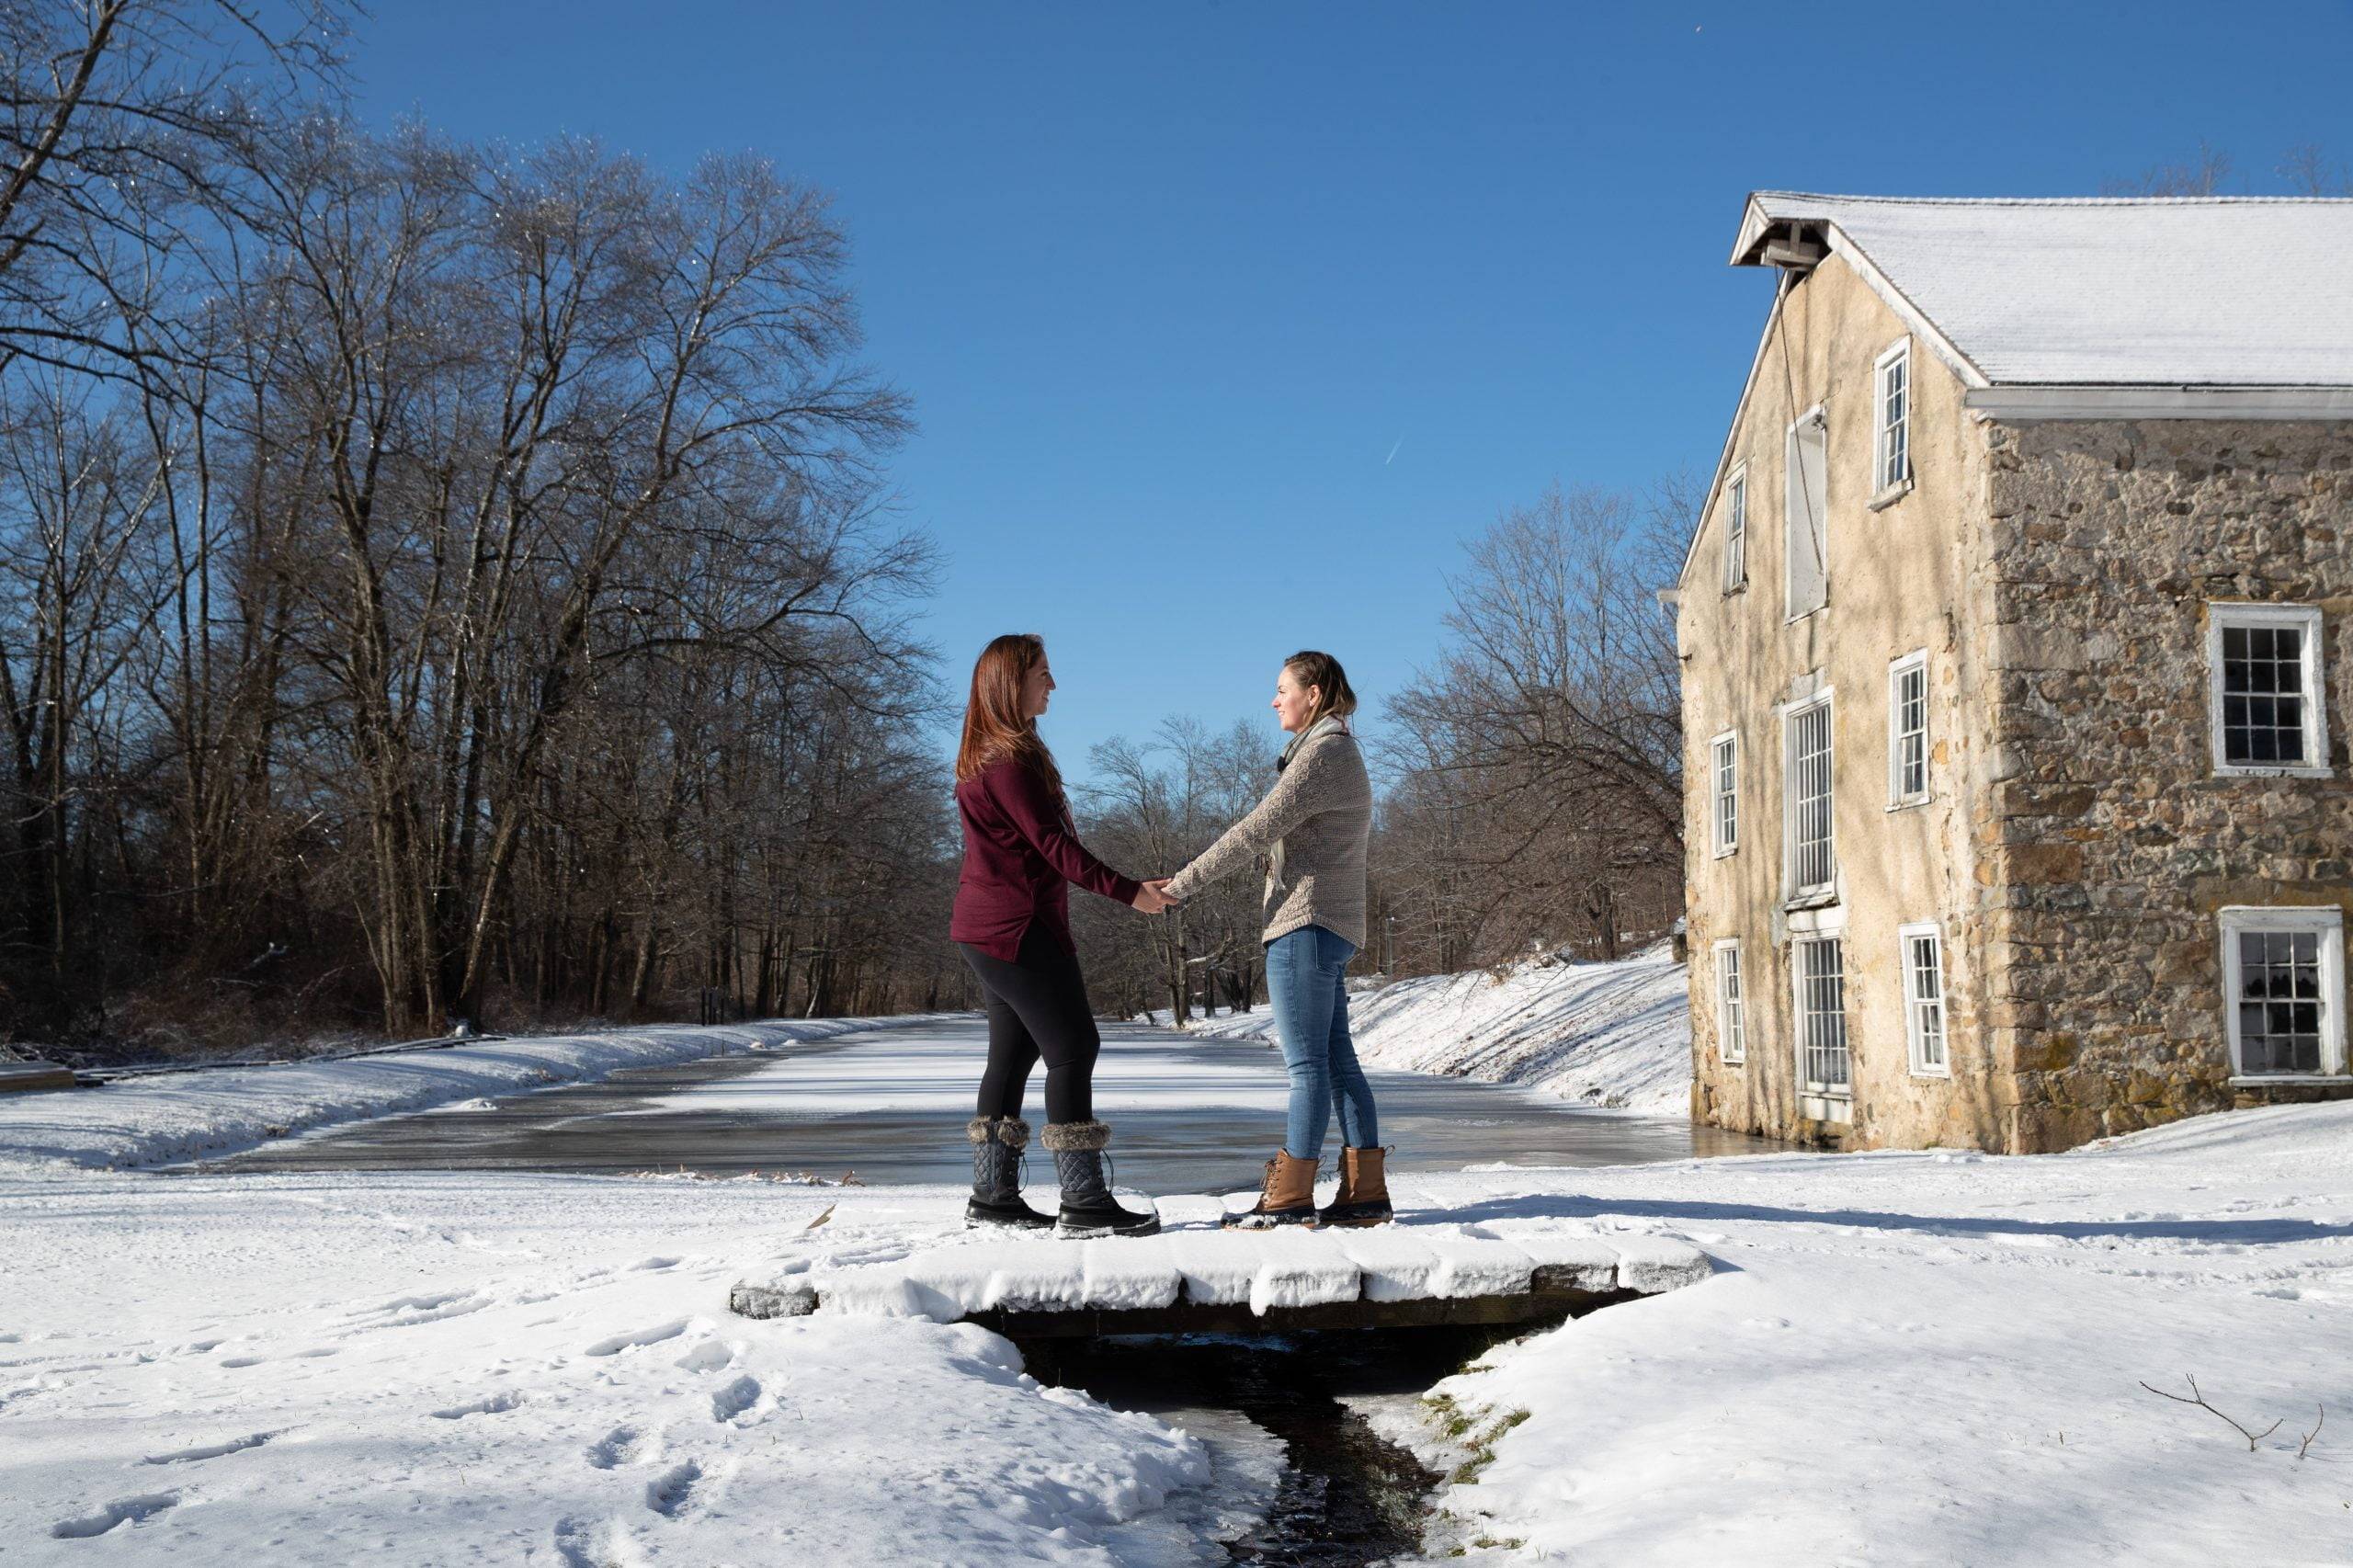 Two people standing on a bridge near a stone building in the snow.